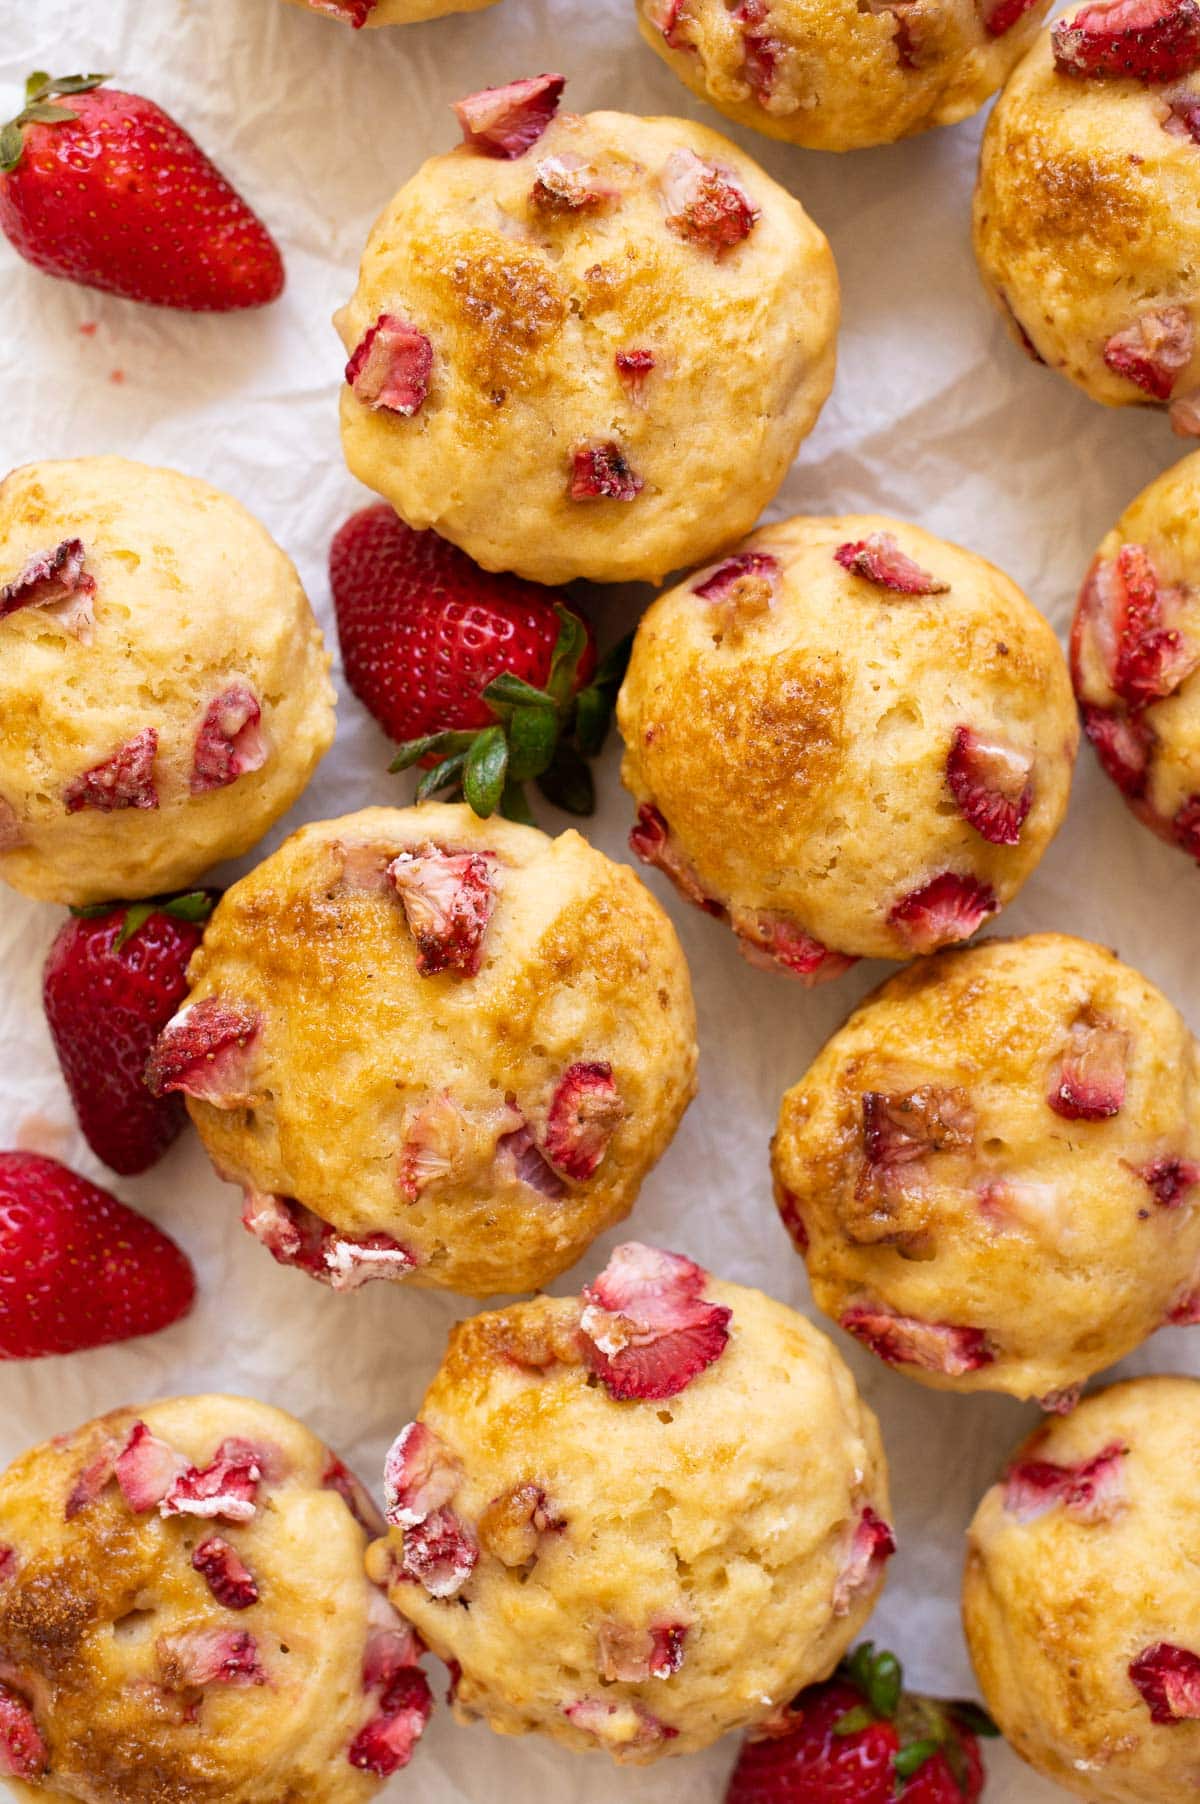 View from the top on strawberry muffins dotted with pieces of strawberries.